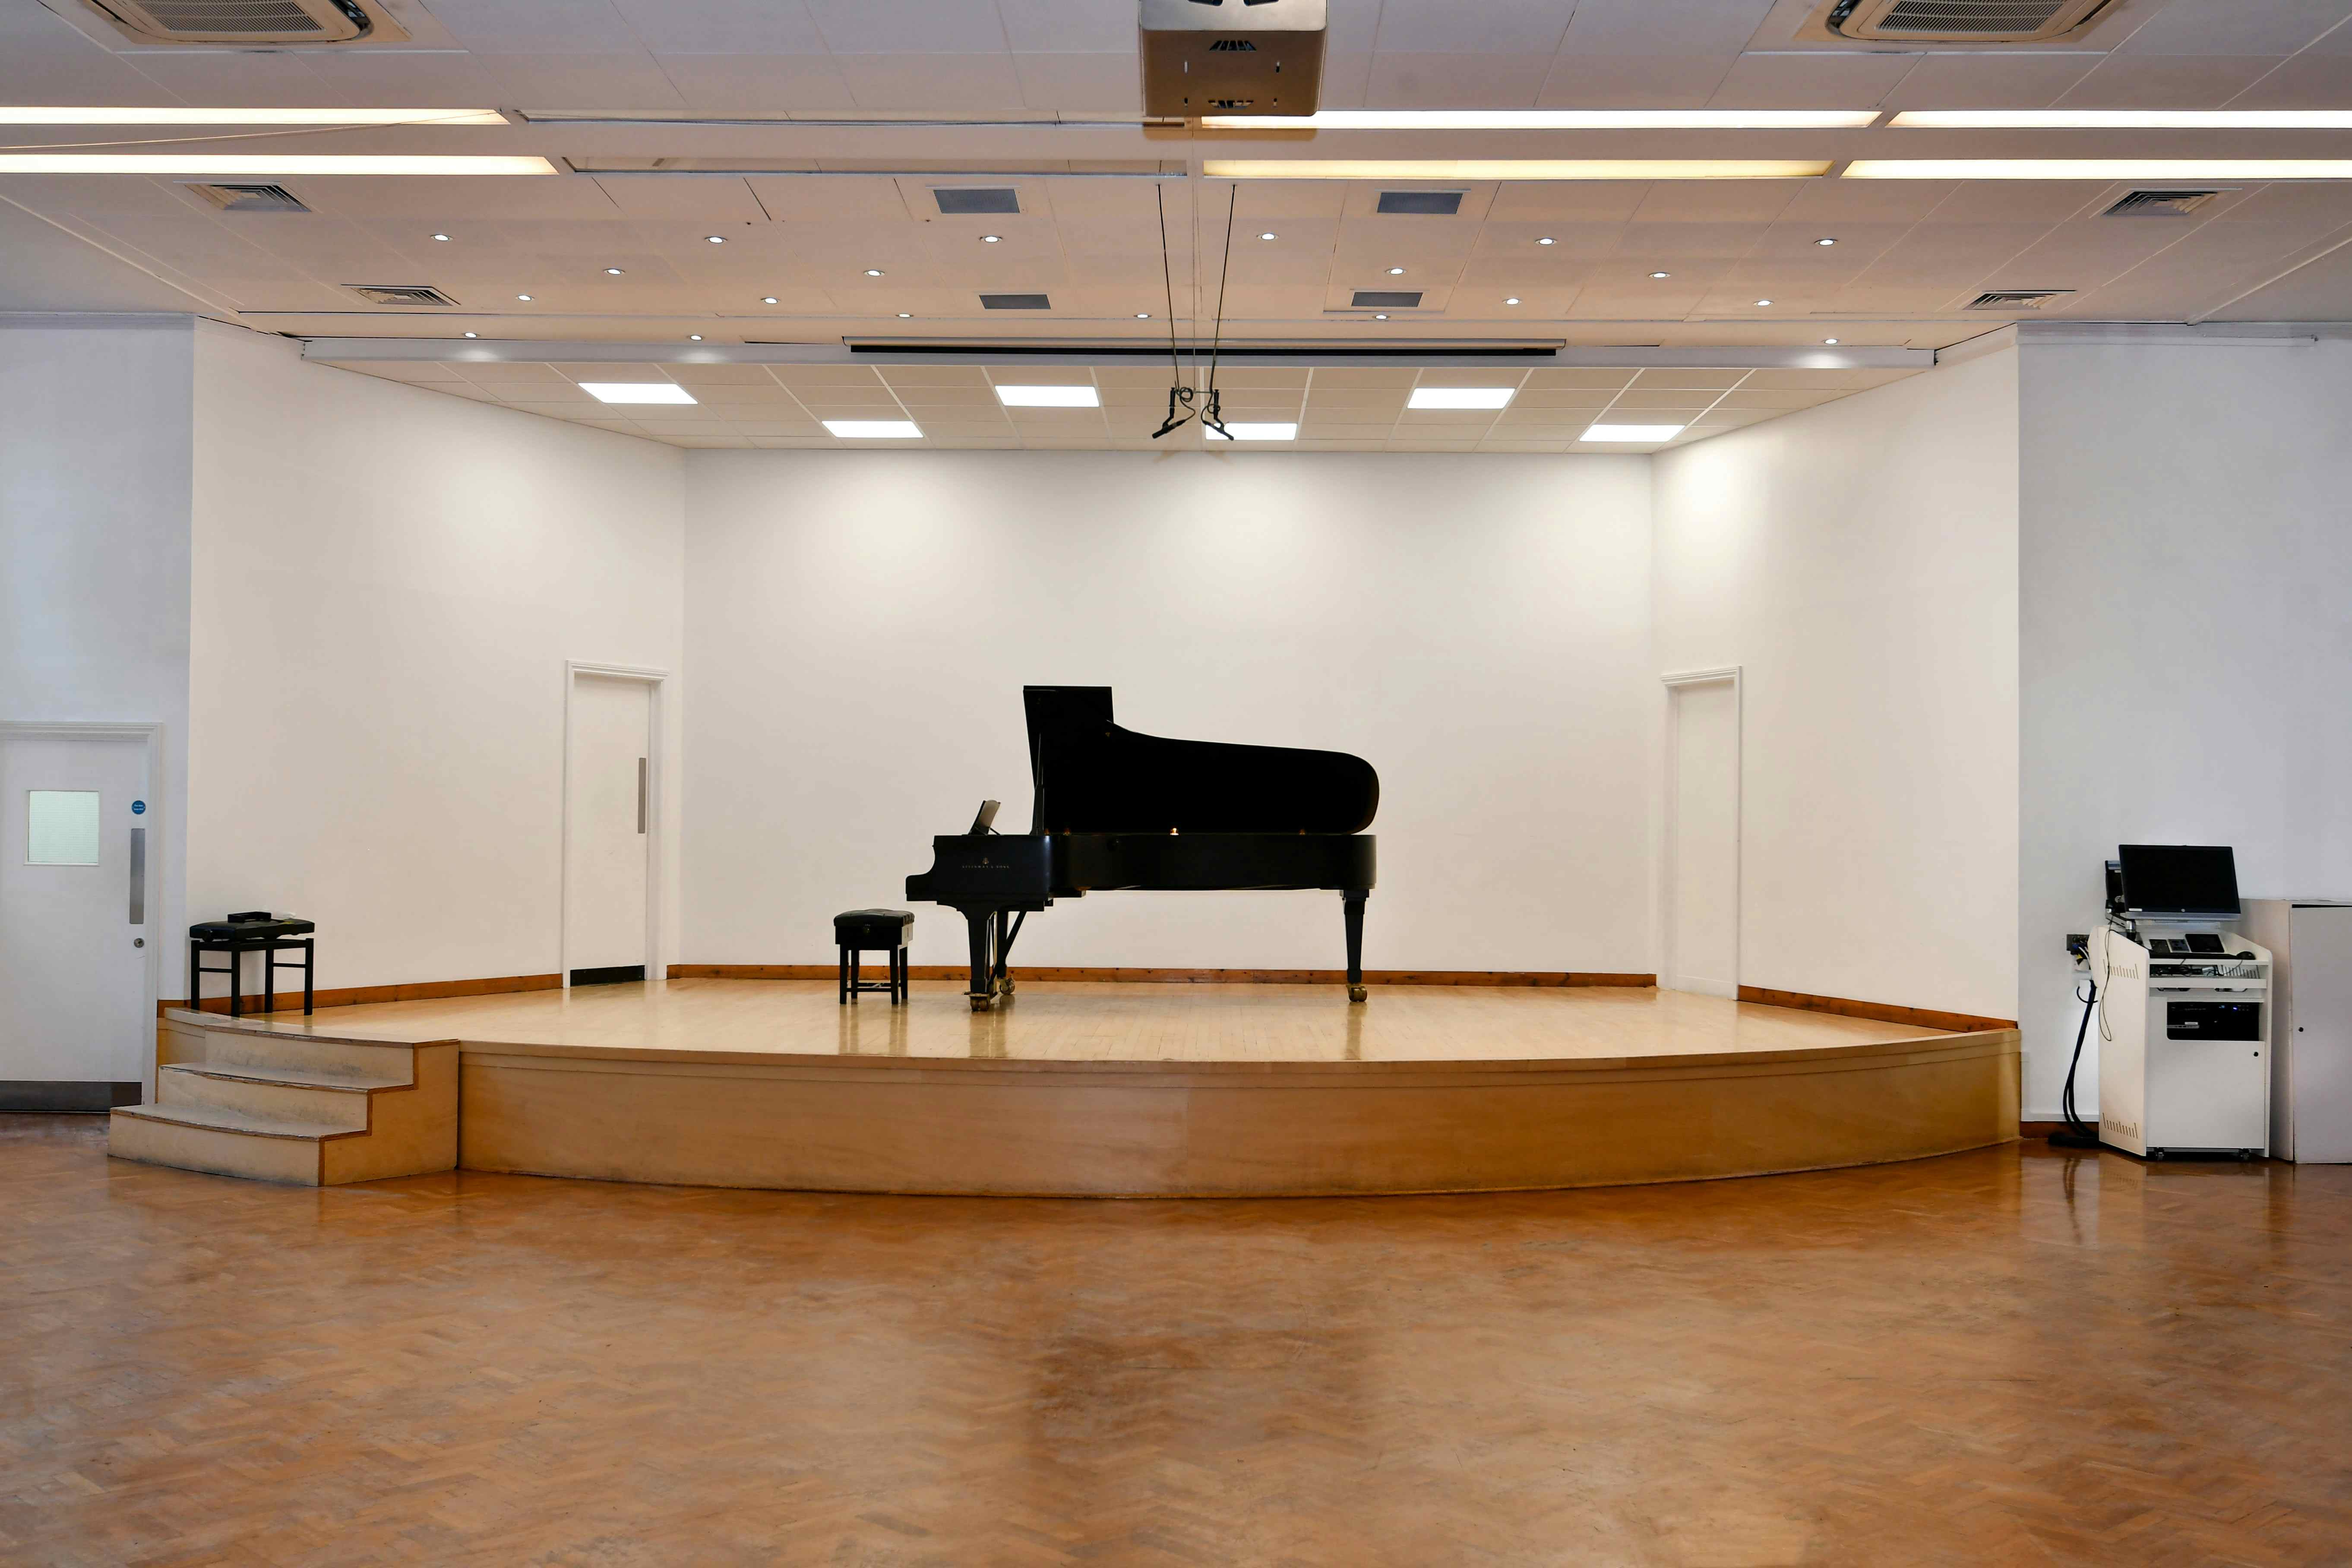 Recital Hall, The Royal College of Music